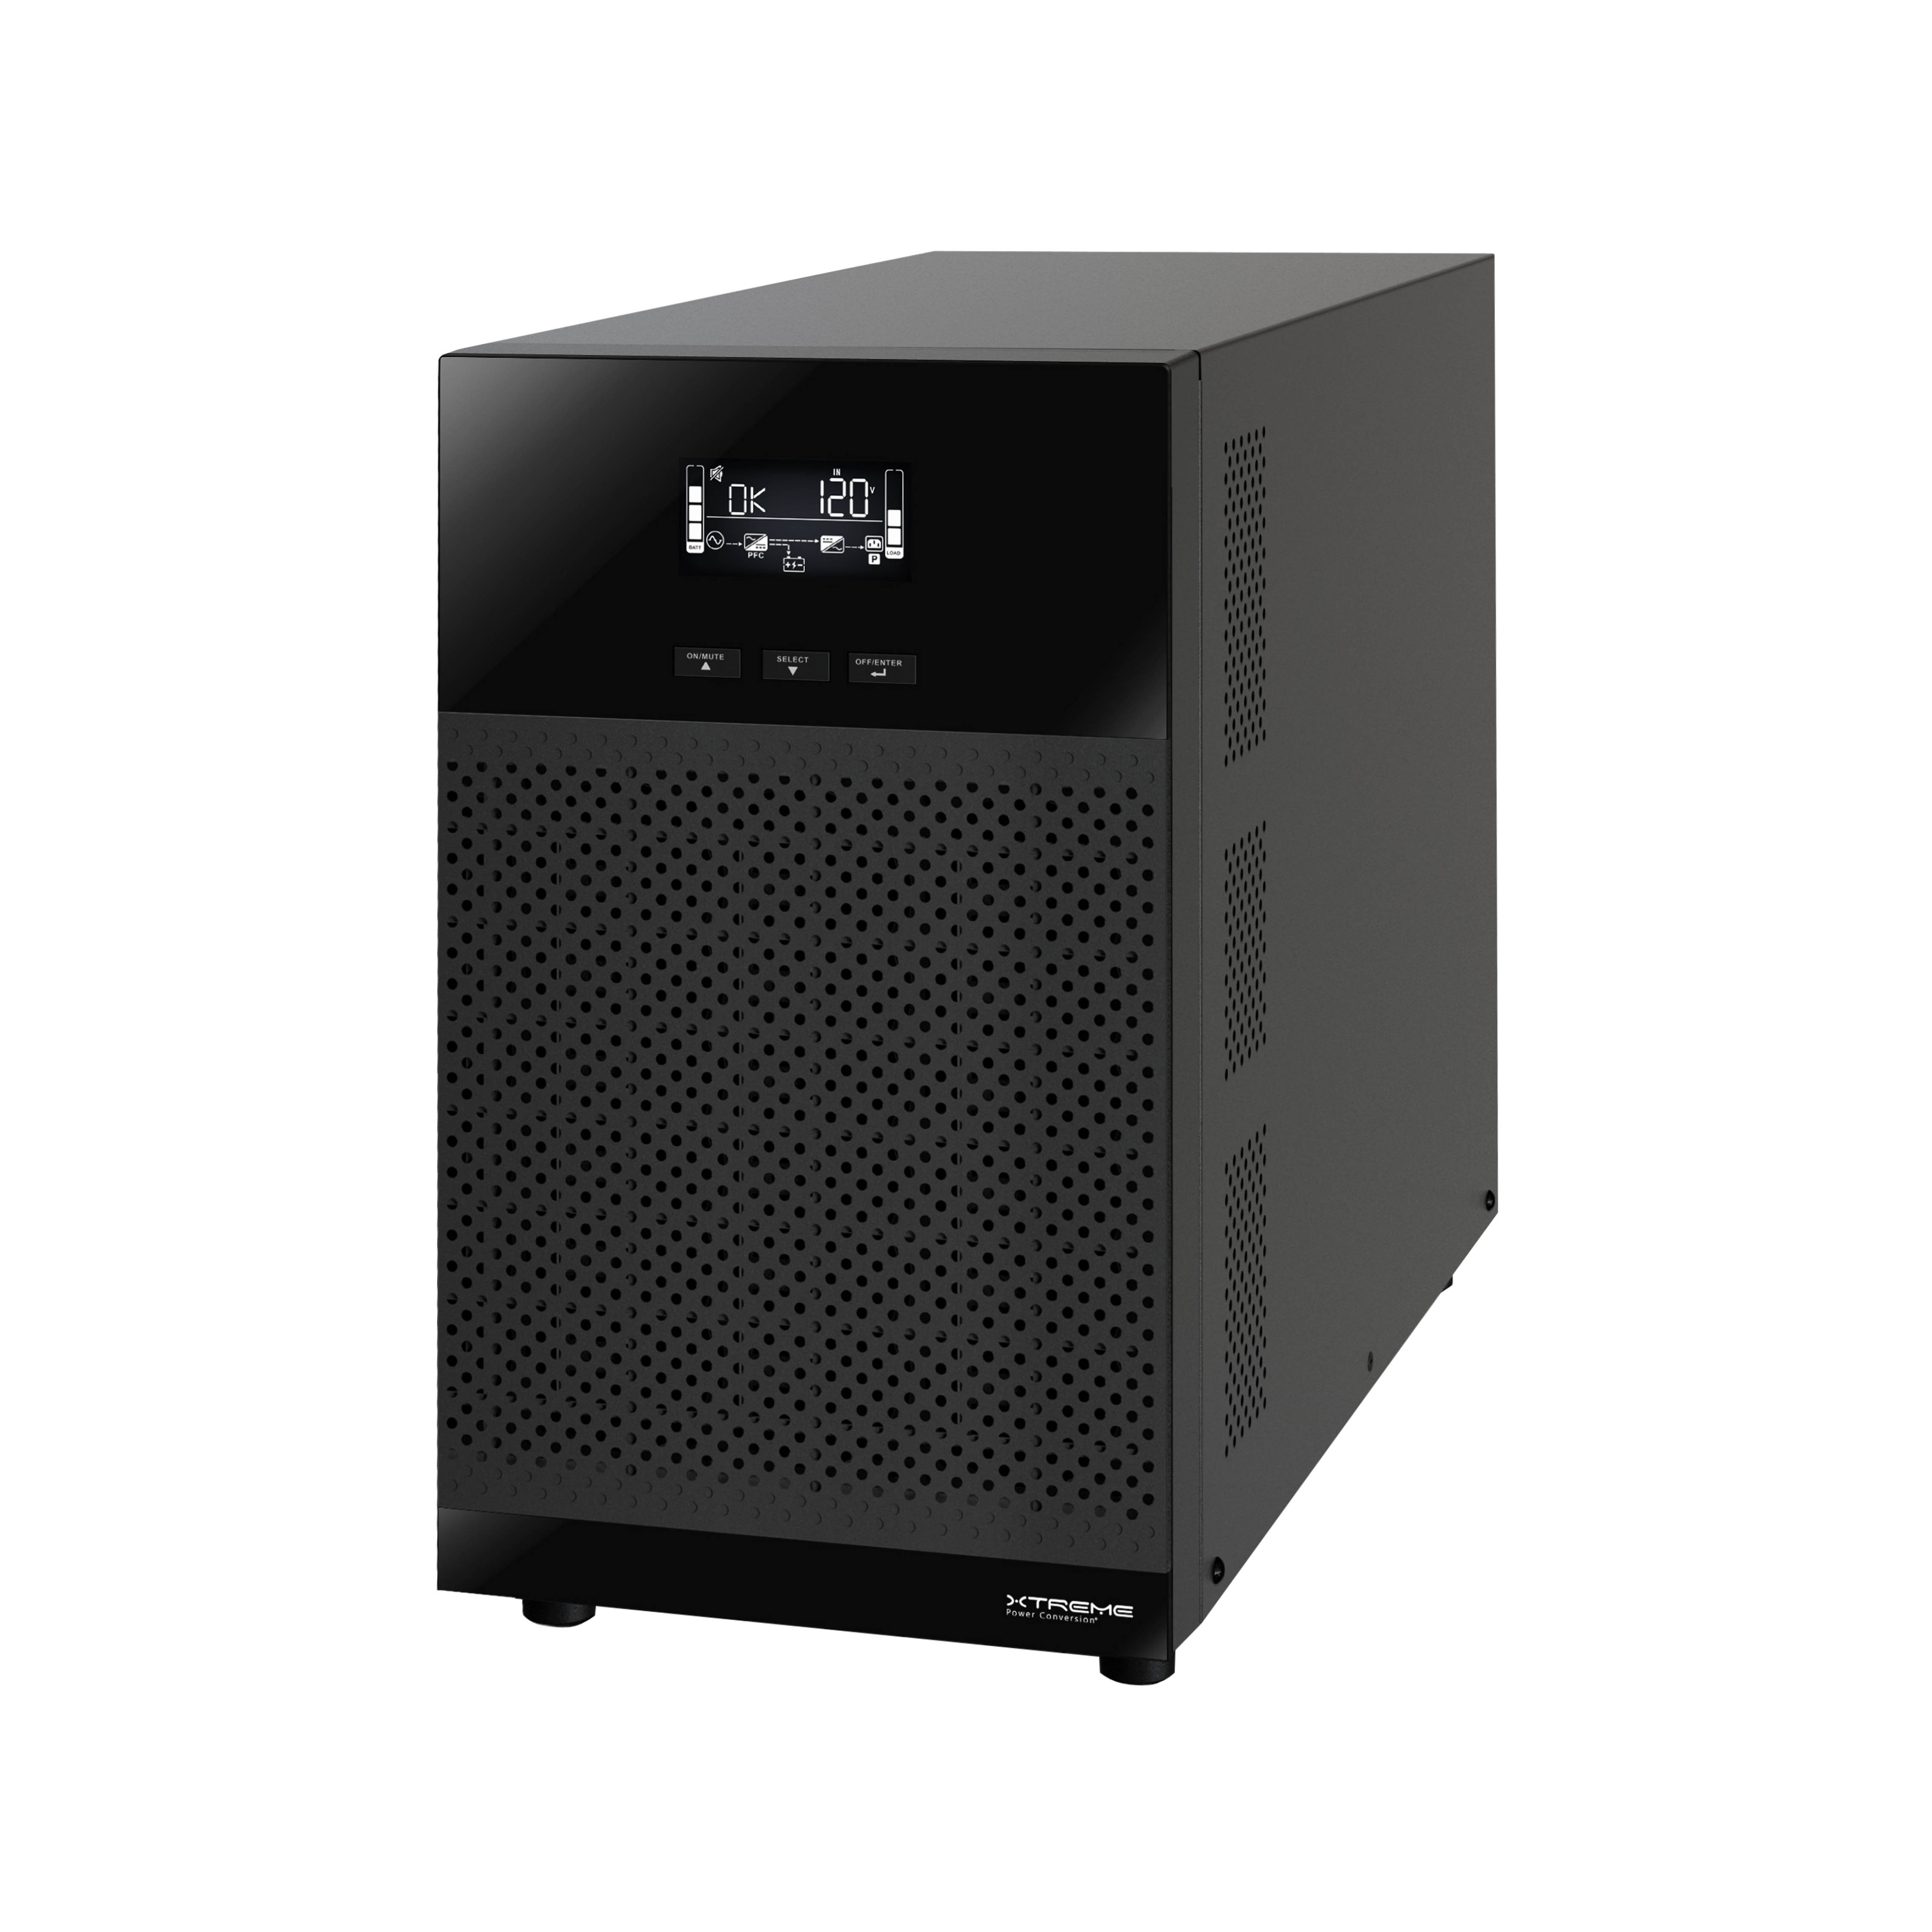 3kva Tower Online UPS (2880W)- 120V Input - Double Conversion